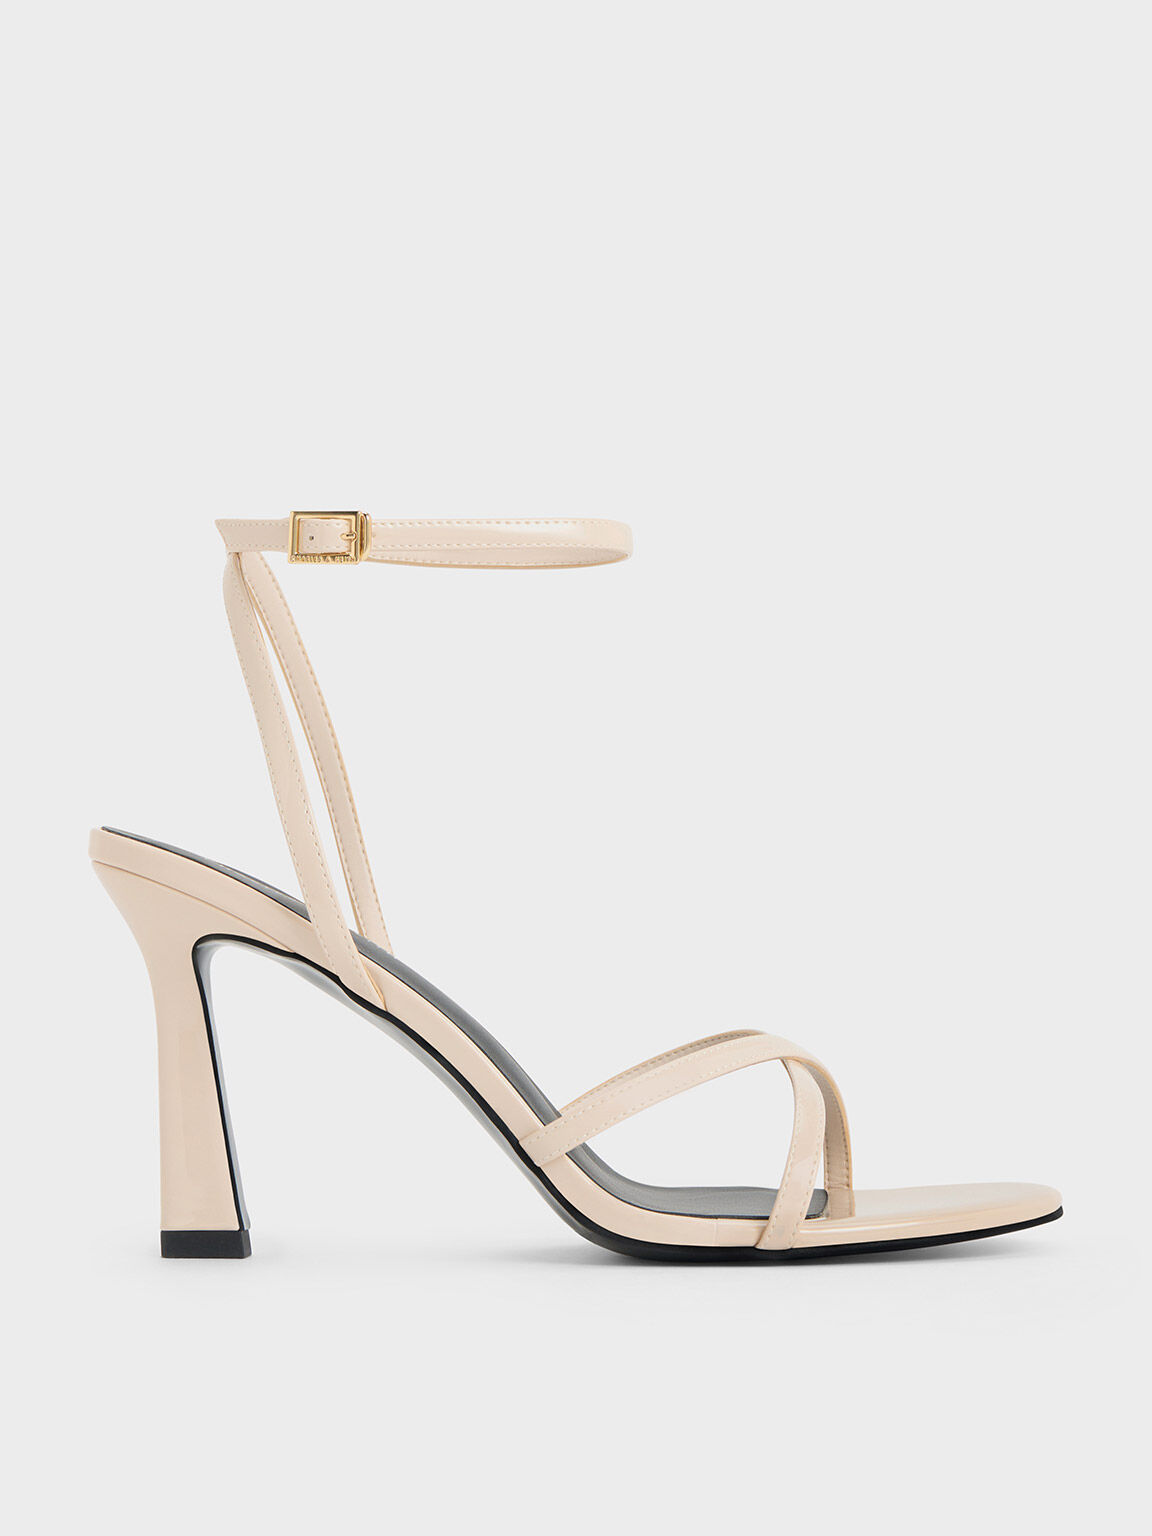 Black Patent Patent Strappy Crossover Sandals - CHARLES & KEITH PH